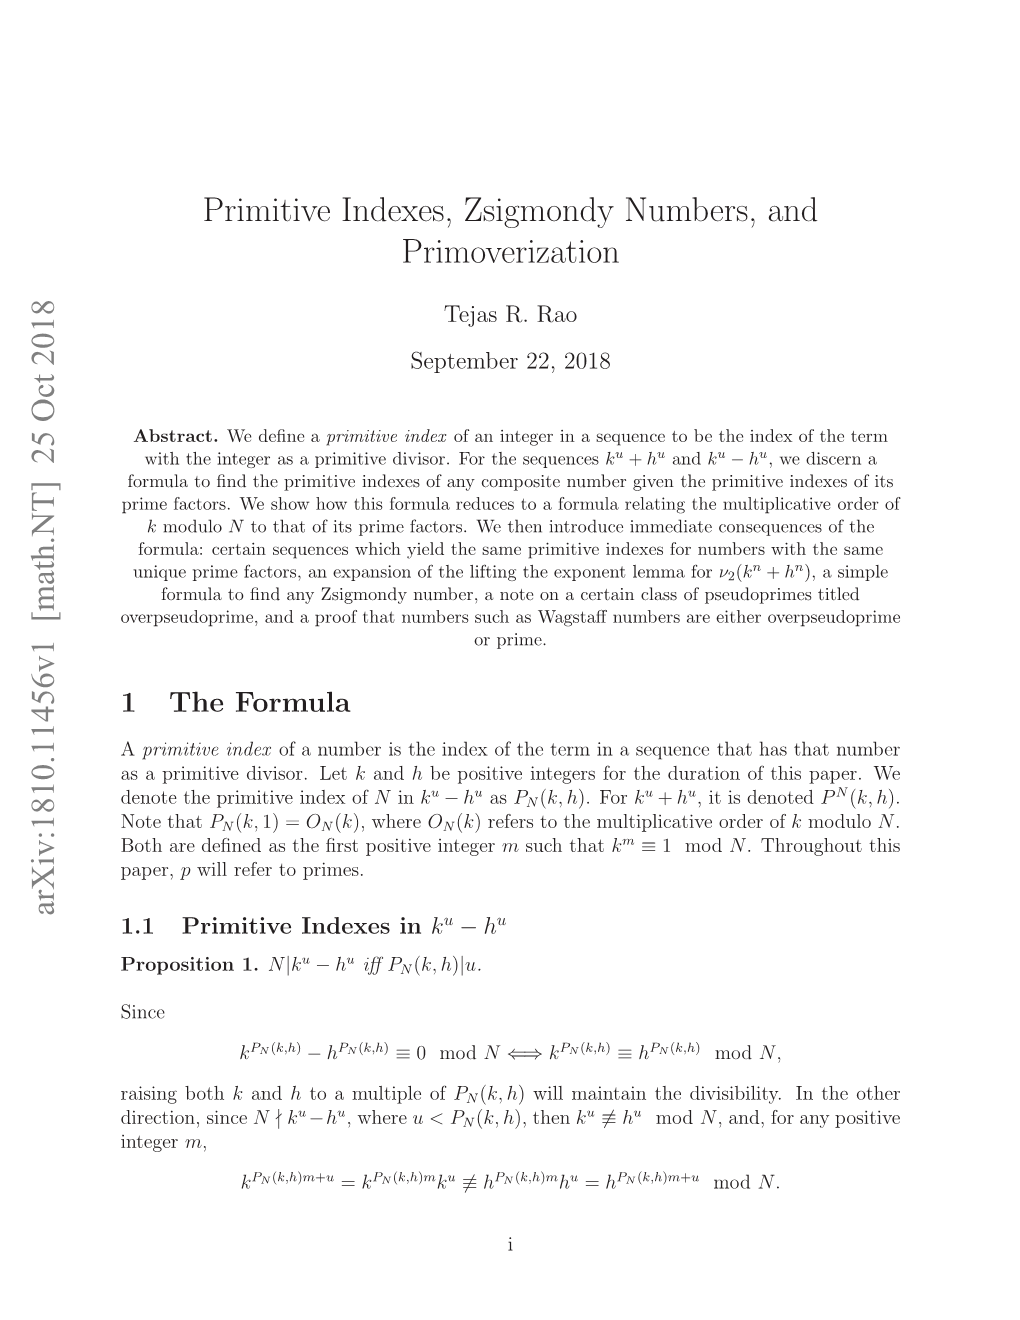 Primitive Indexes, Zsigmondy Numbers, and Primoverization